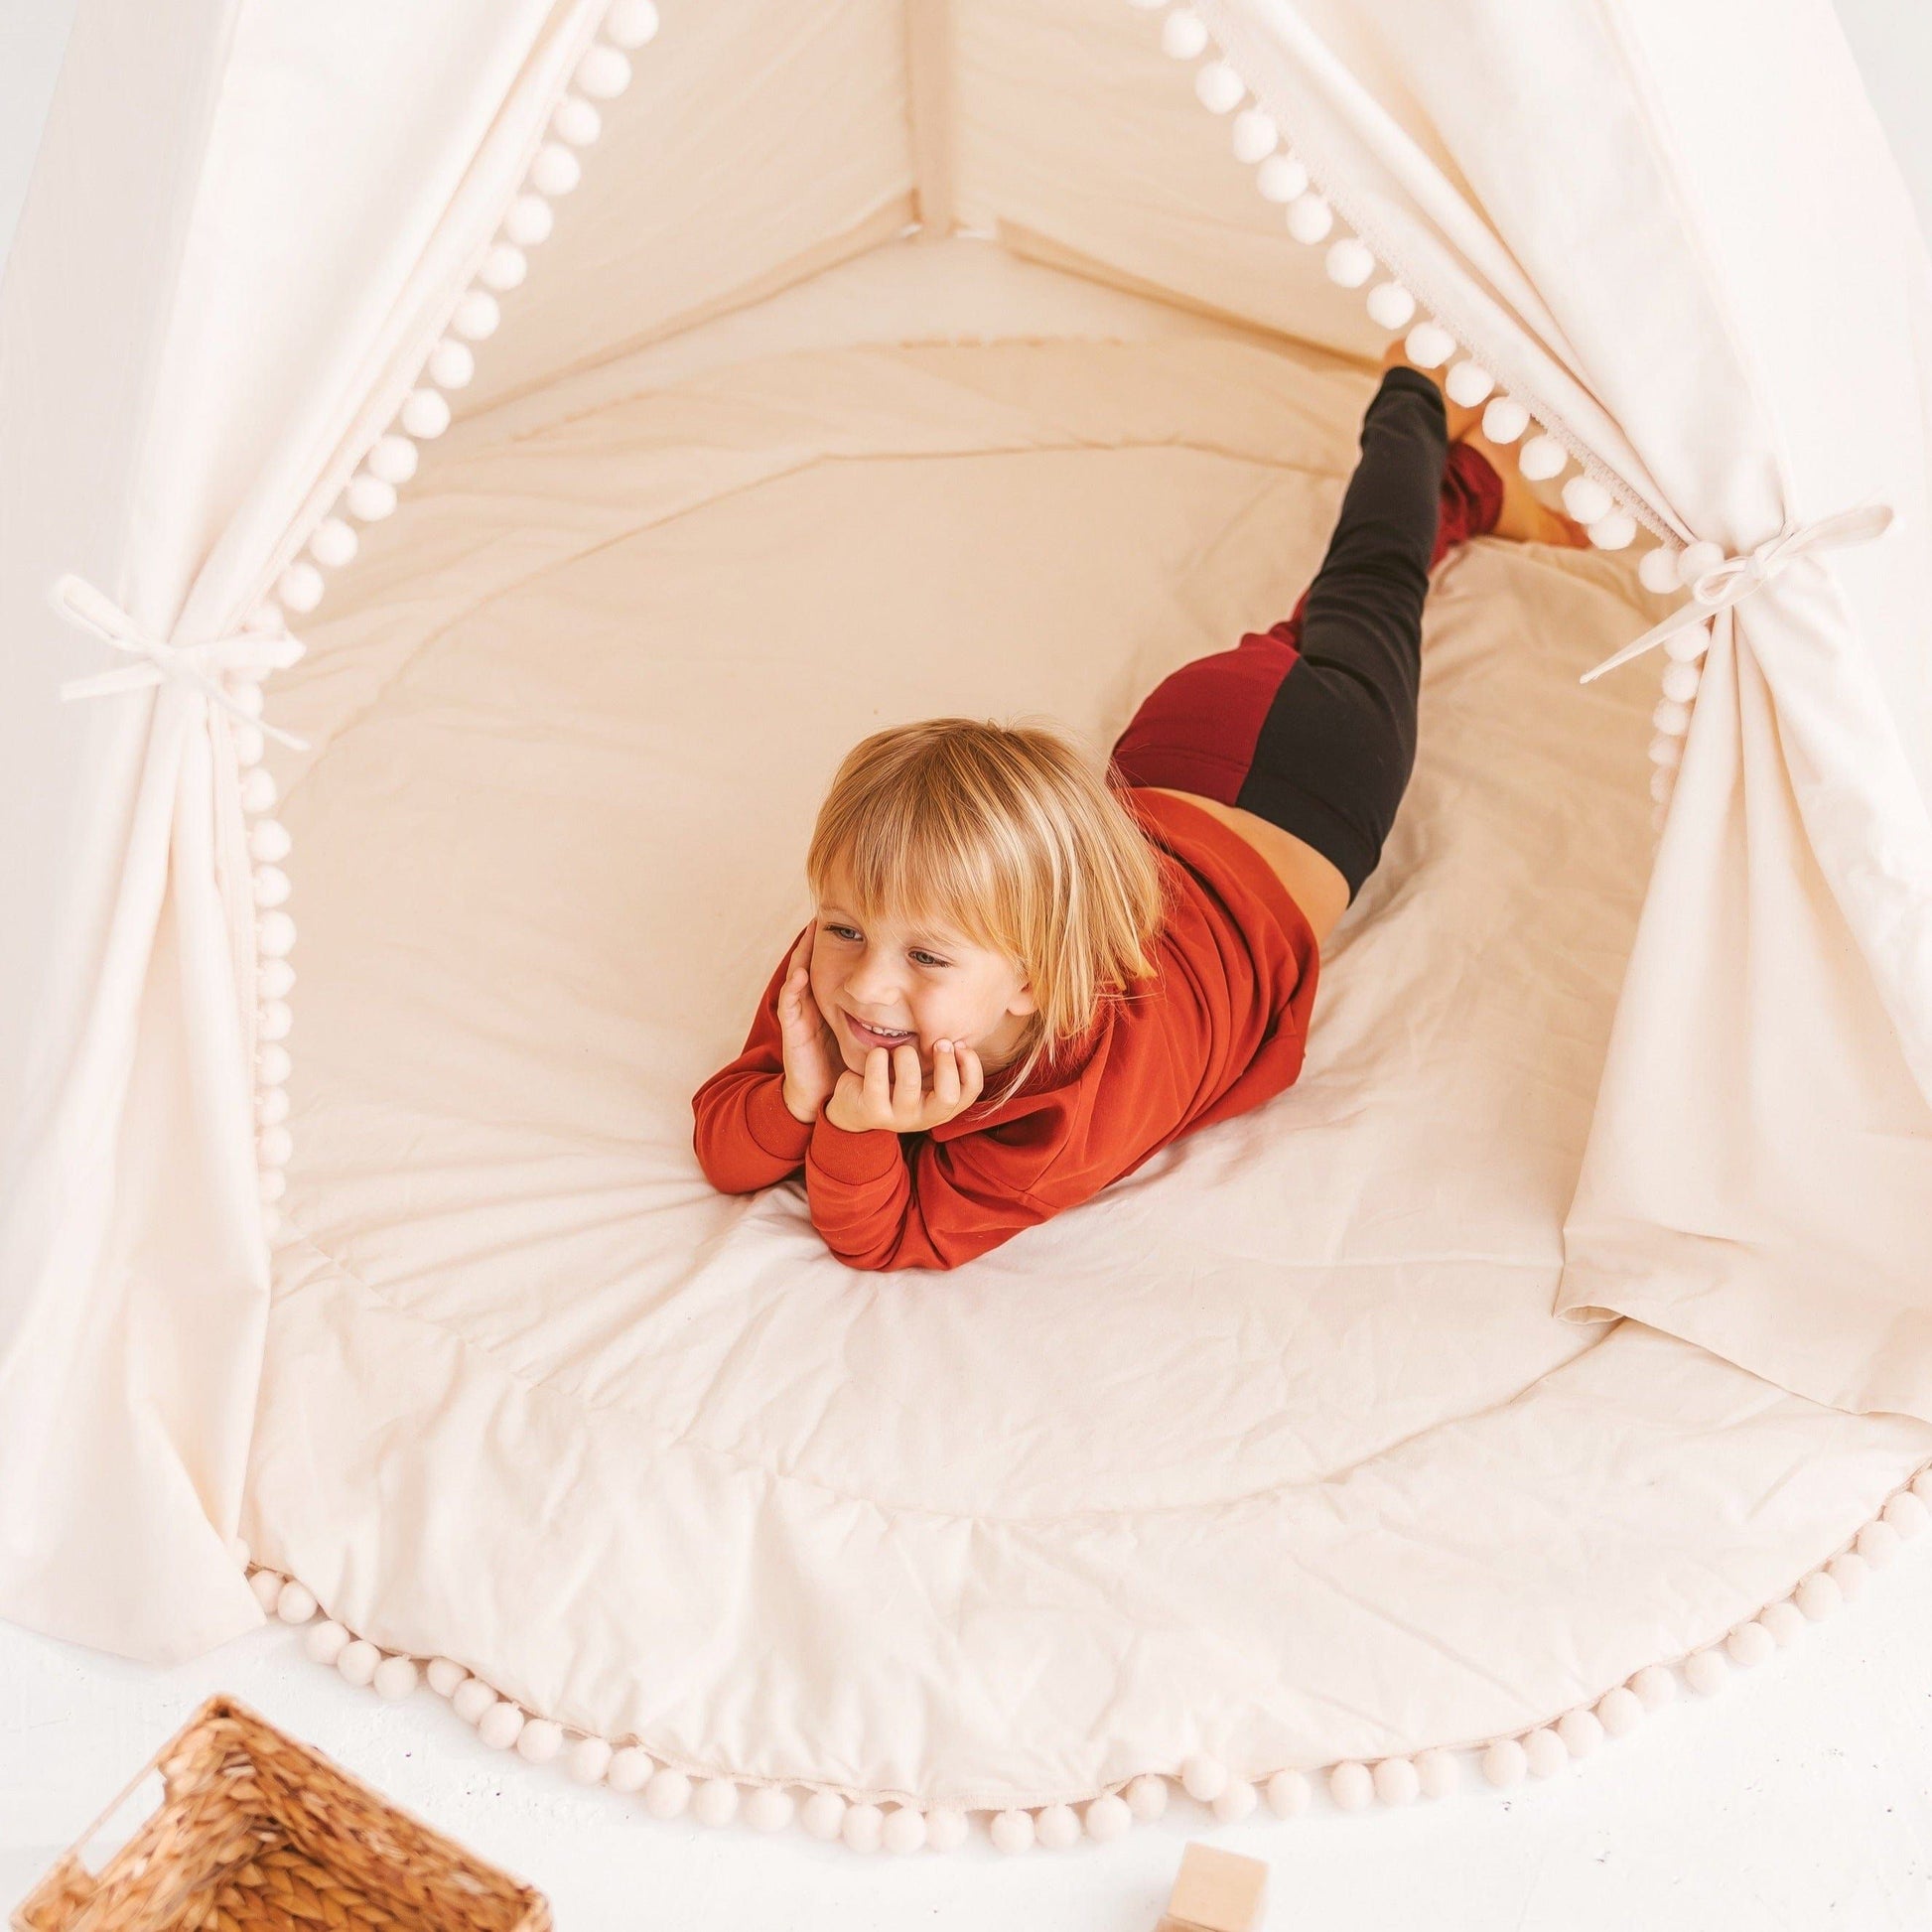 smiling child lying in MINICAMP Extra Large Kids Teepee Tent With Pom Pom Decor